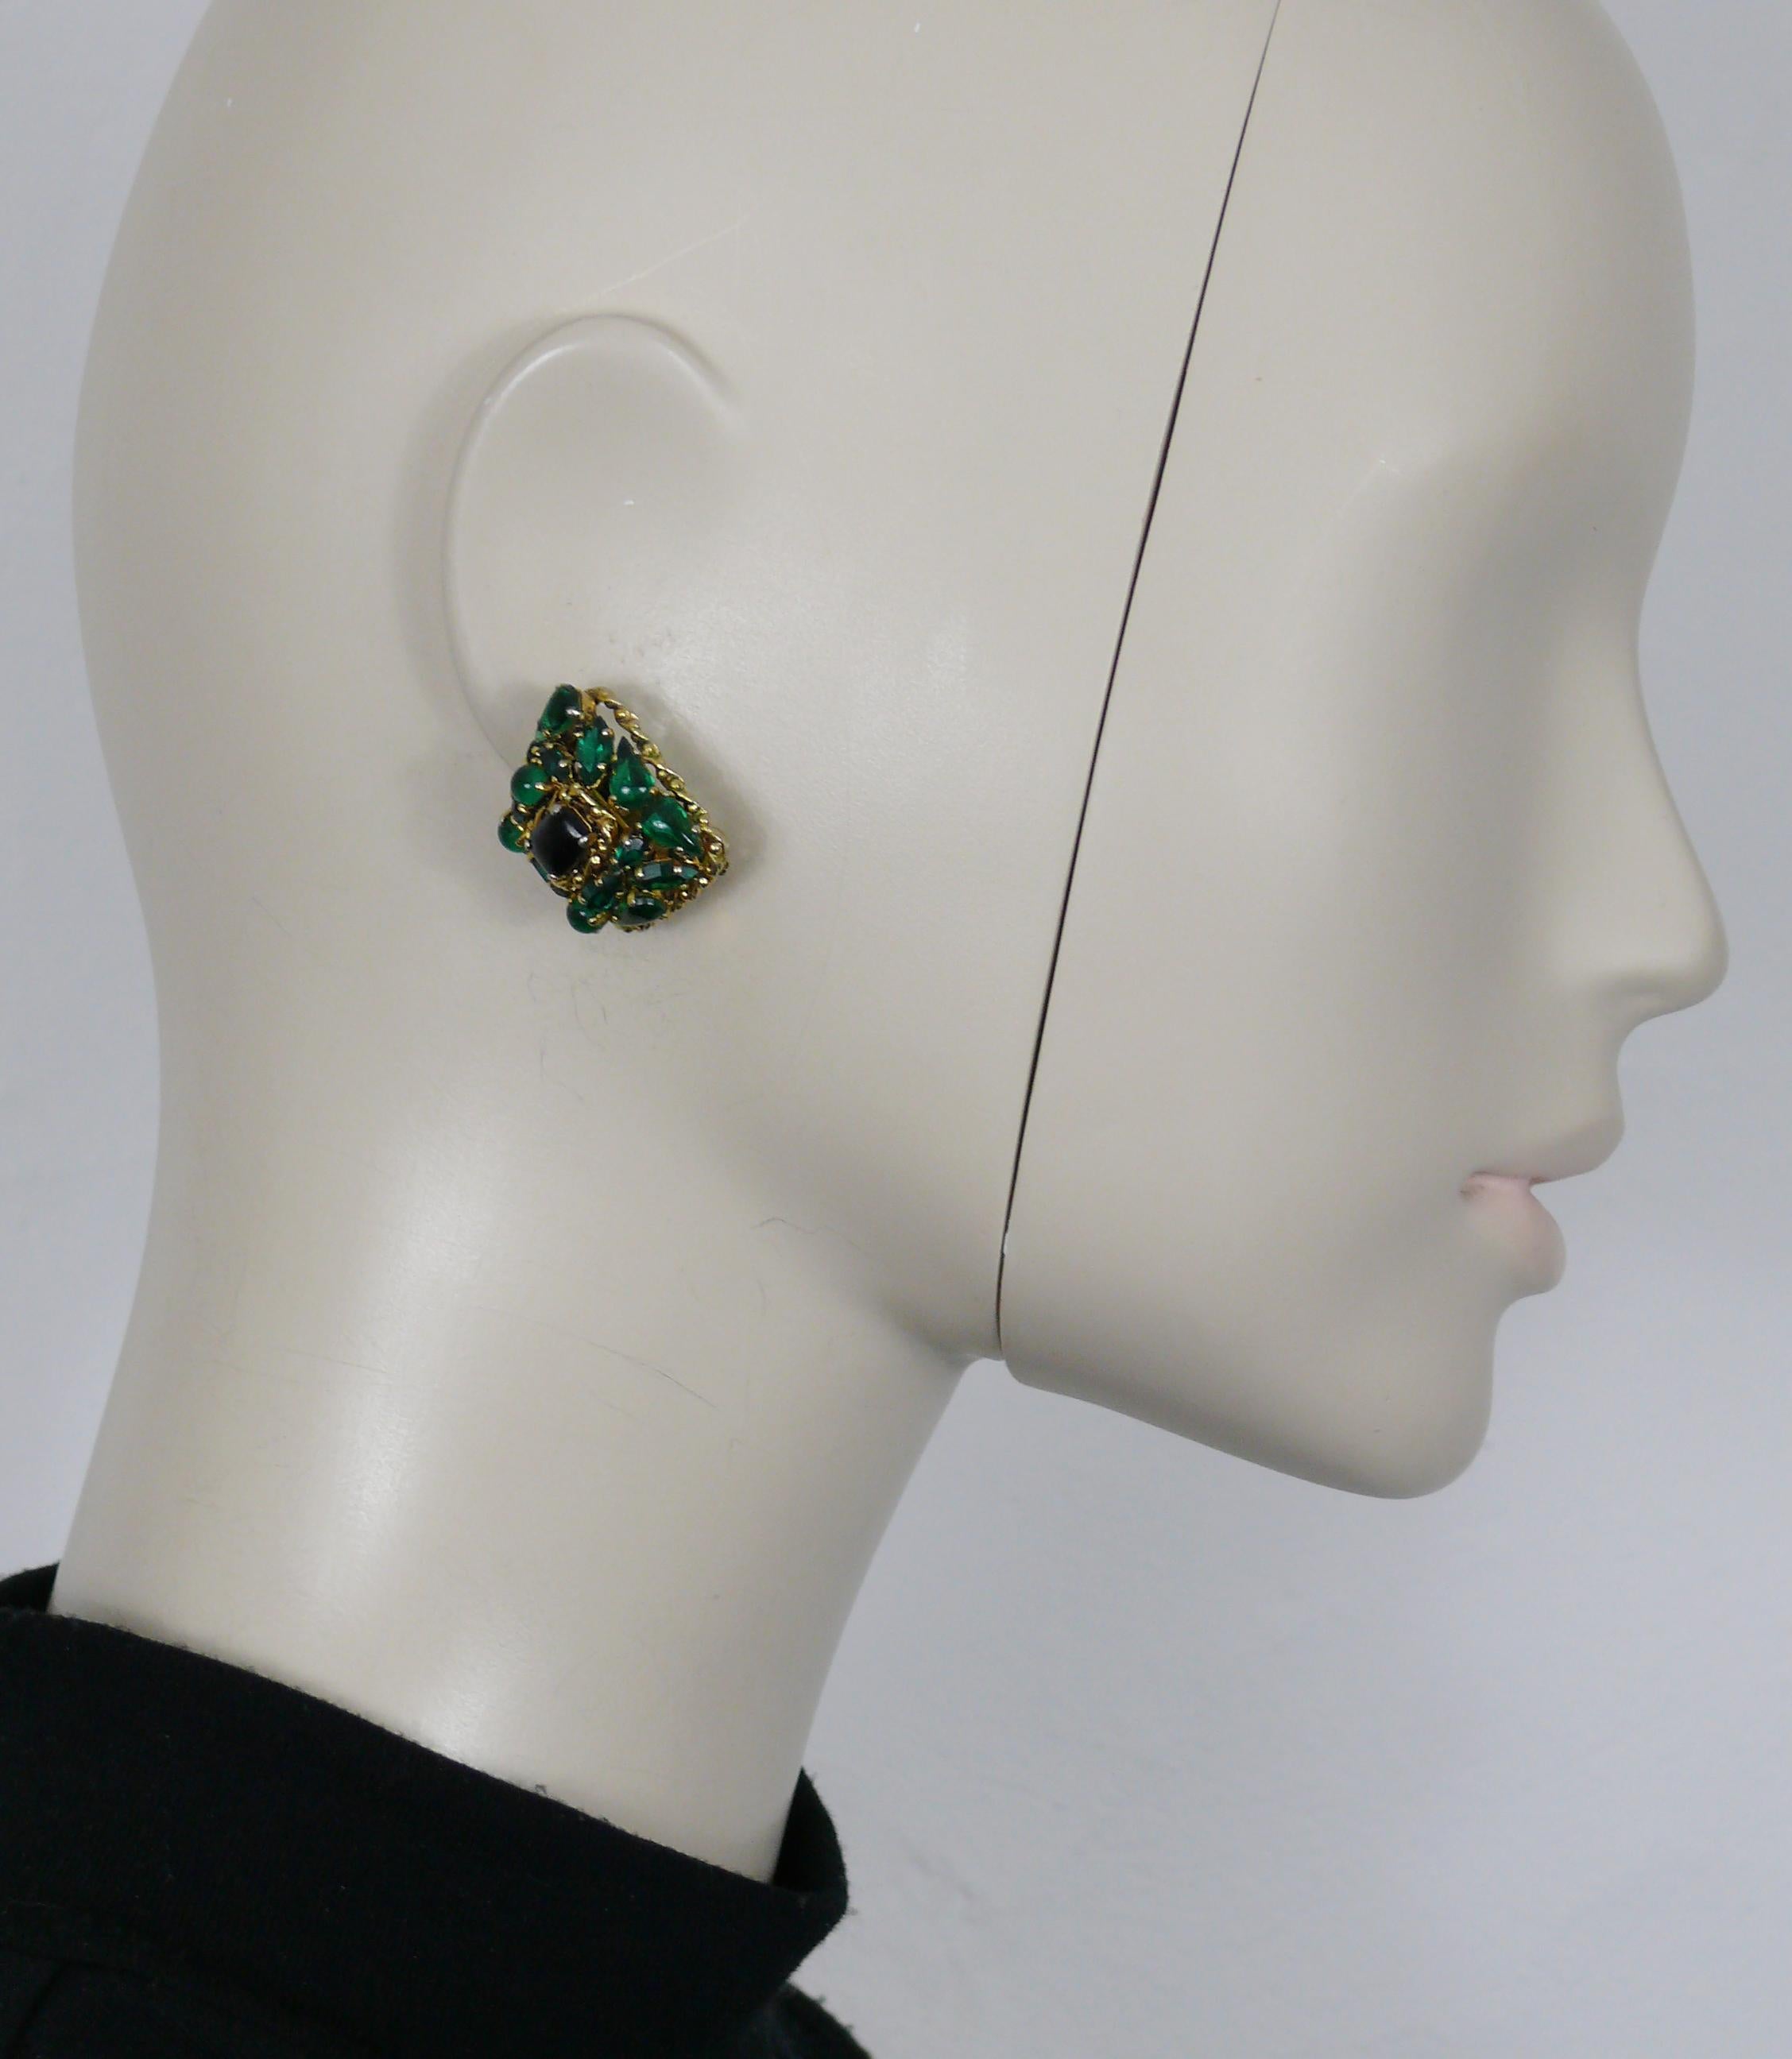 CHRISTIAN DIOR vintage gold tone clip-on earrings embellished with green crystals/glass cabochons and a black glass cabochon at the center.

Embossed  CHRISTIAN DIOR 1963 Made in Germany.

Indicative measurements : max. height approx 2.5 cm (0.98